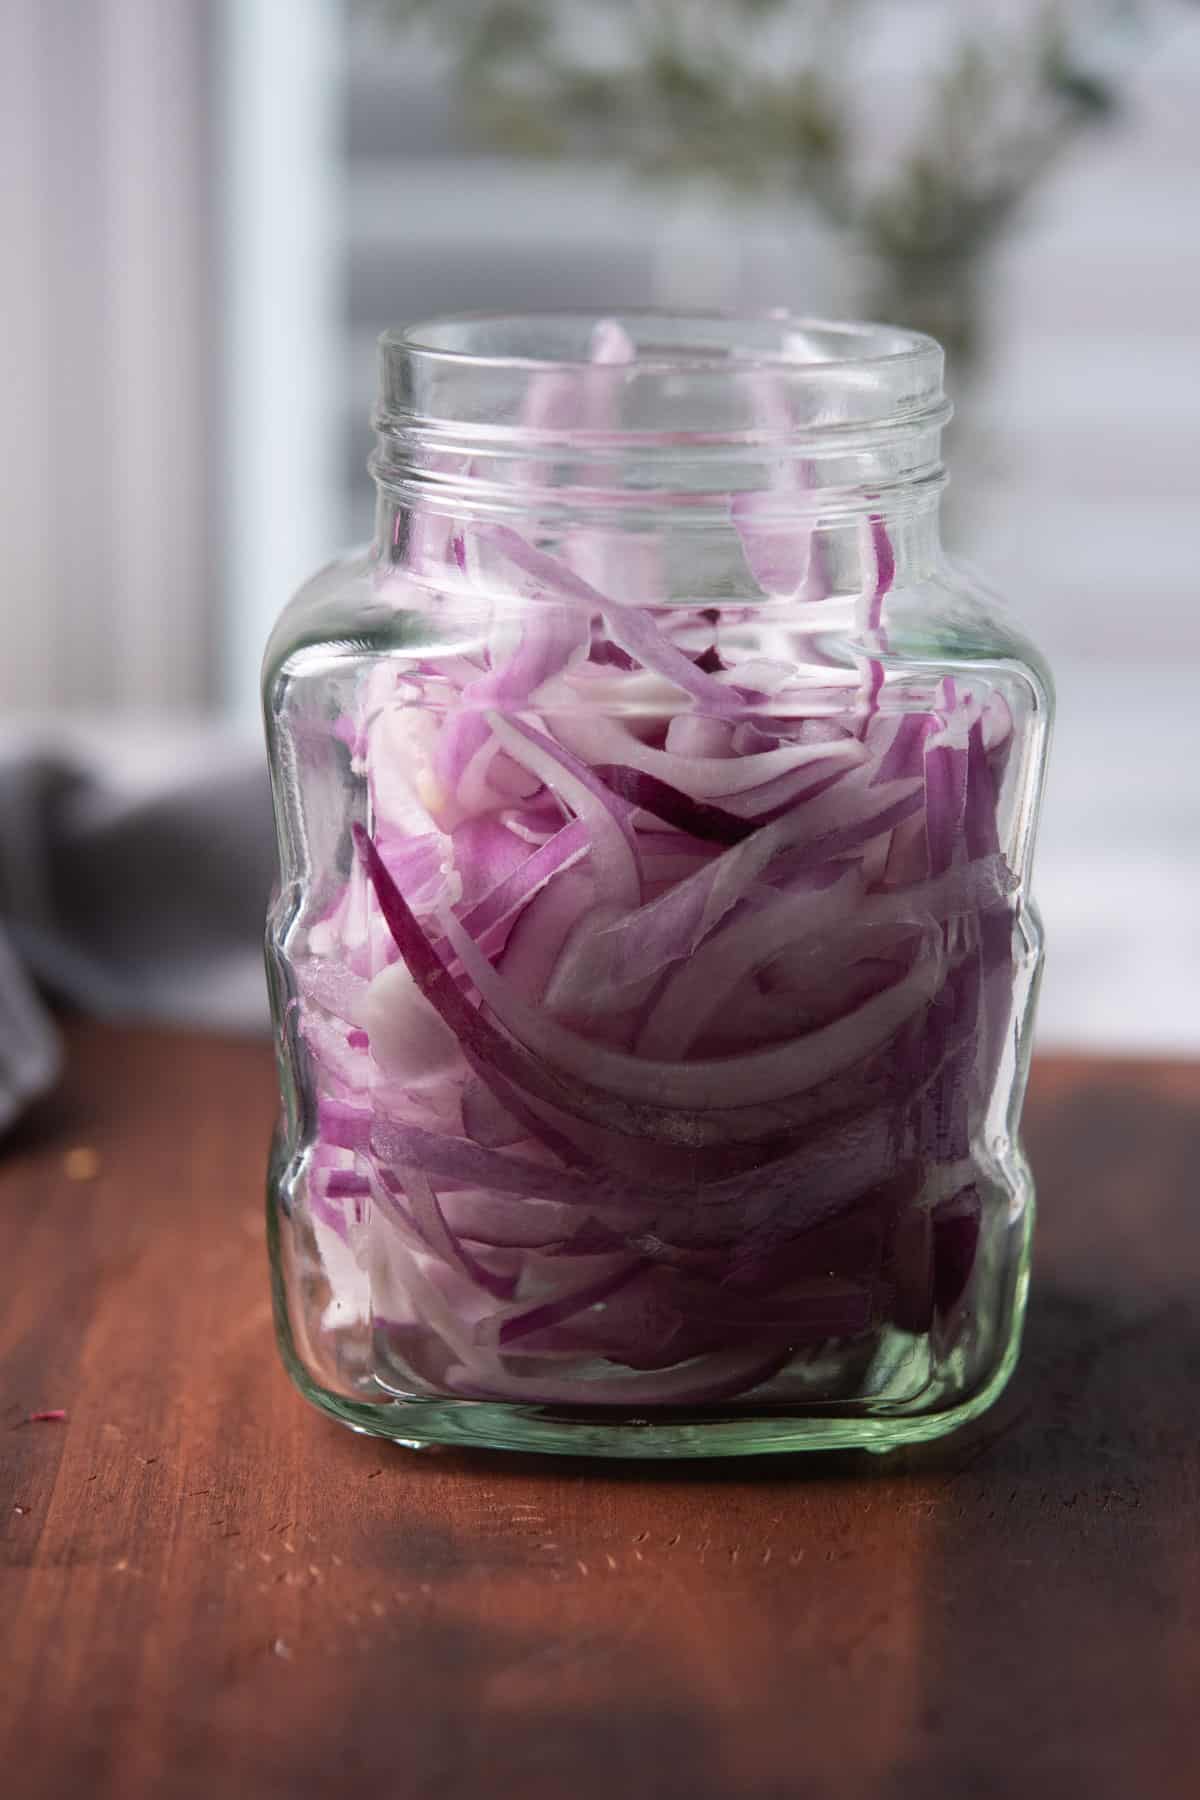 steps 1 of the recipe, stuffing onion slices in a container